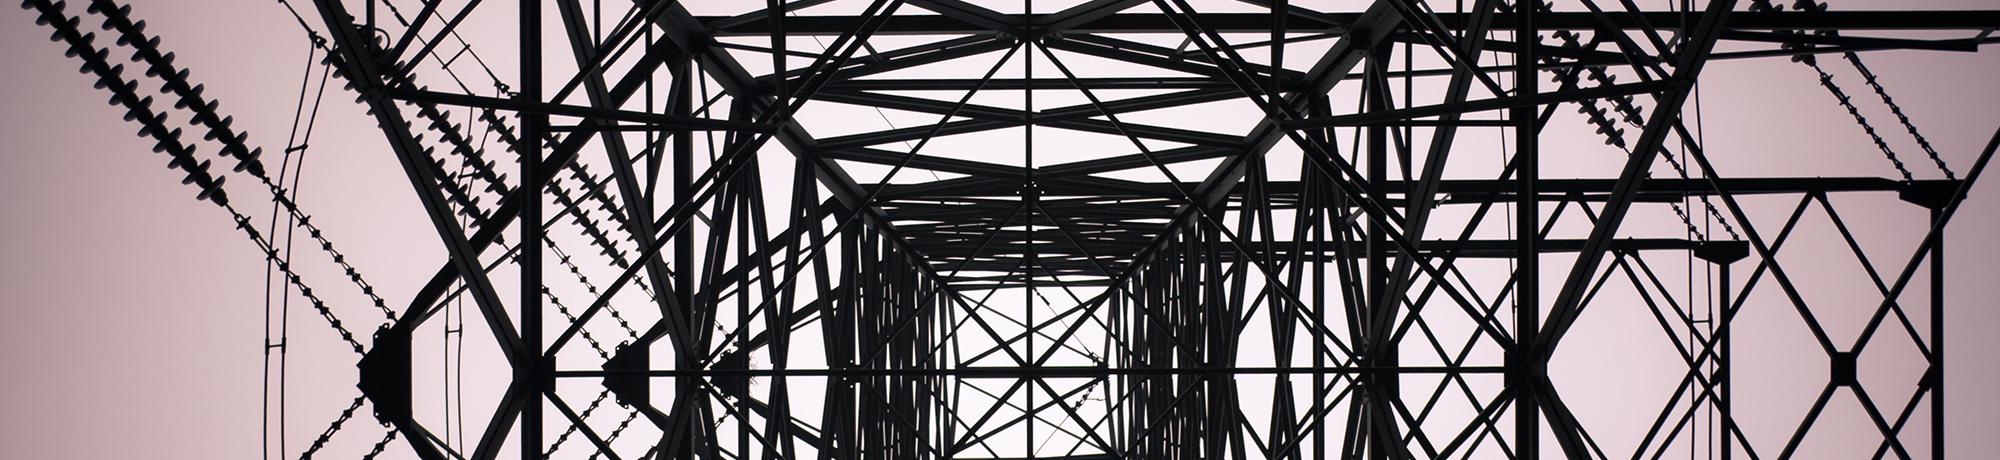 a photograph from underneath a telephone tower